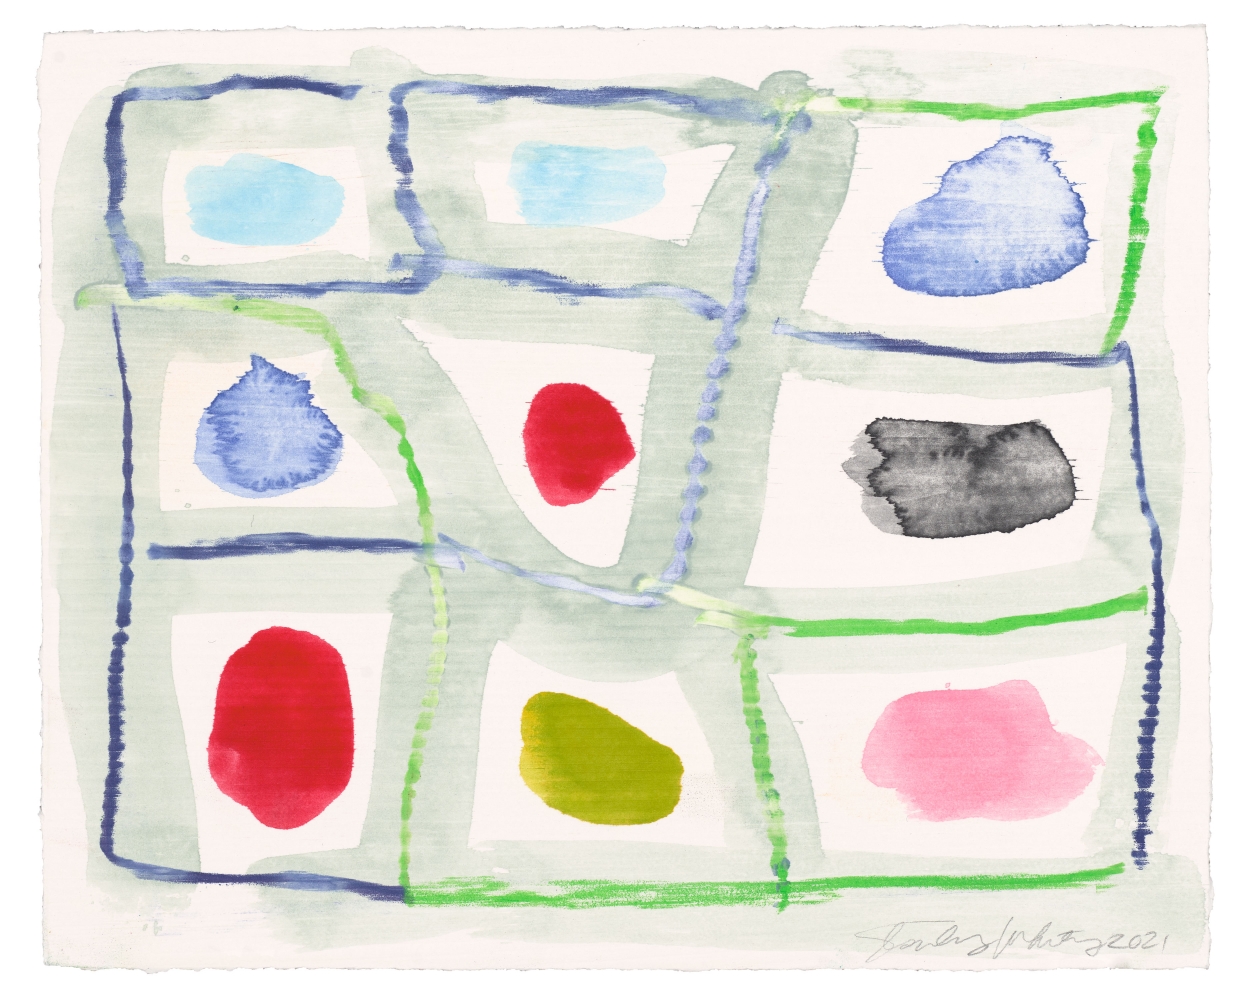 Untitled, 2021 Monotype in watercolor and crayon on Lanaquarelle paper